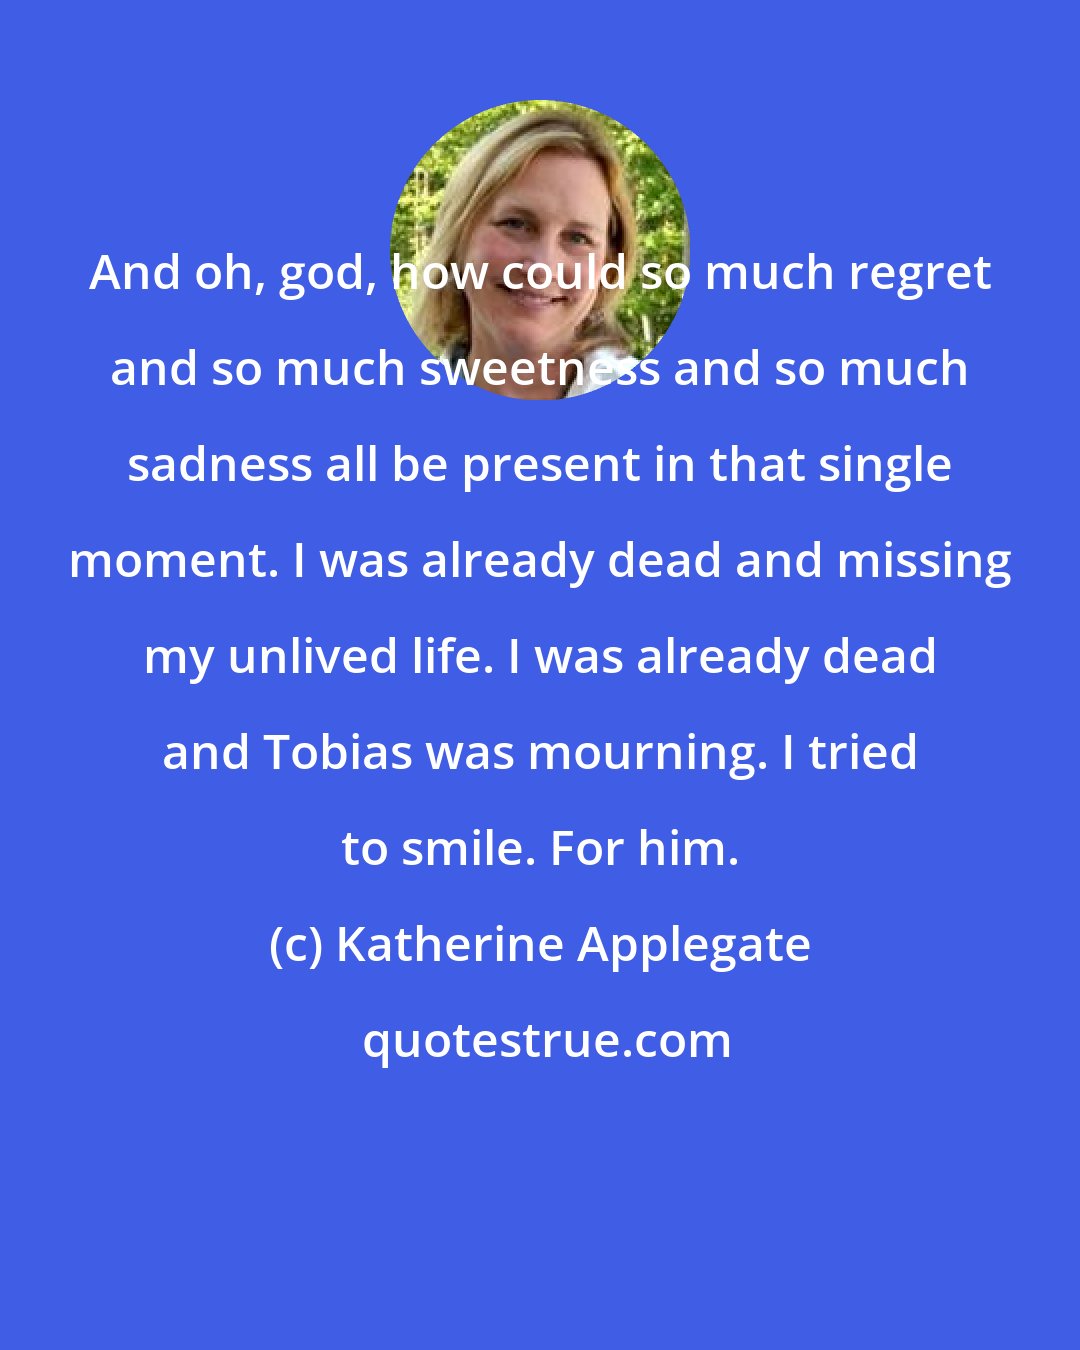 Katherine Applegate: And oh, god, how could so much regret and so much sweetness and so much sadness all be present in that single moment. I was already dead and missing my unlived life. I was already dead and Tobias was mourning. I tried to smile. For him.